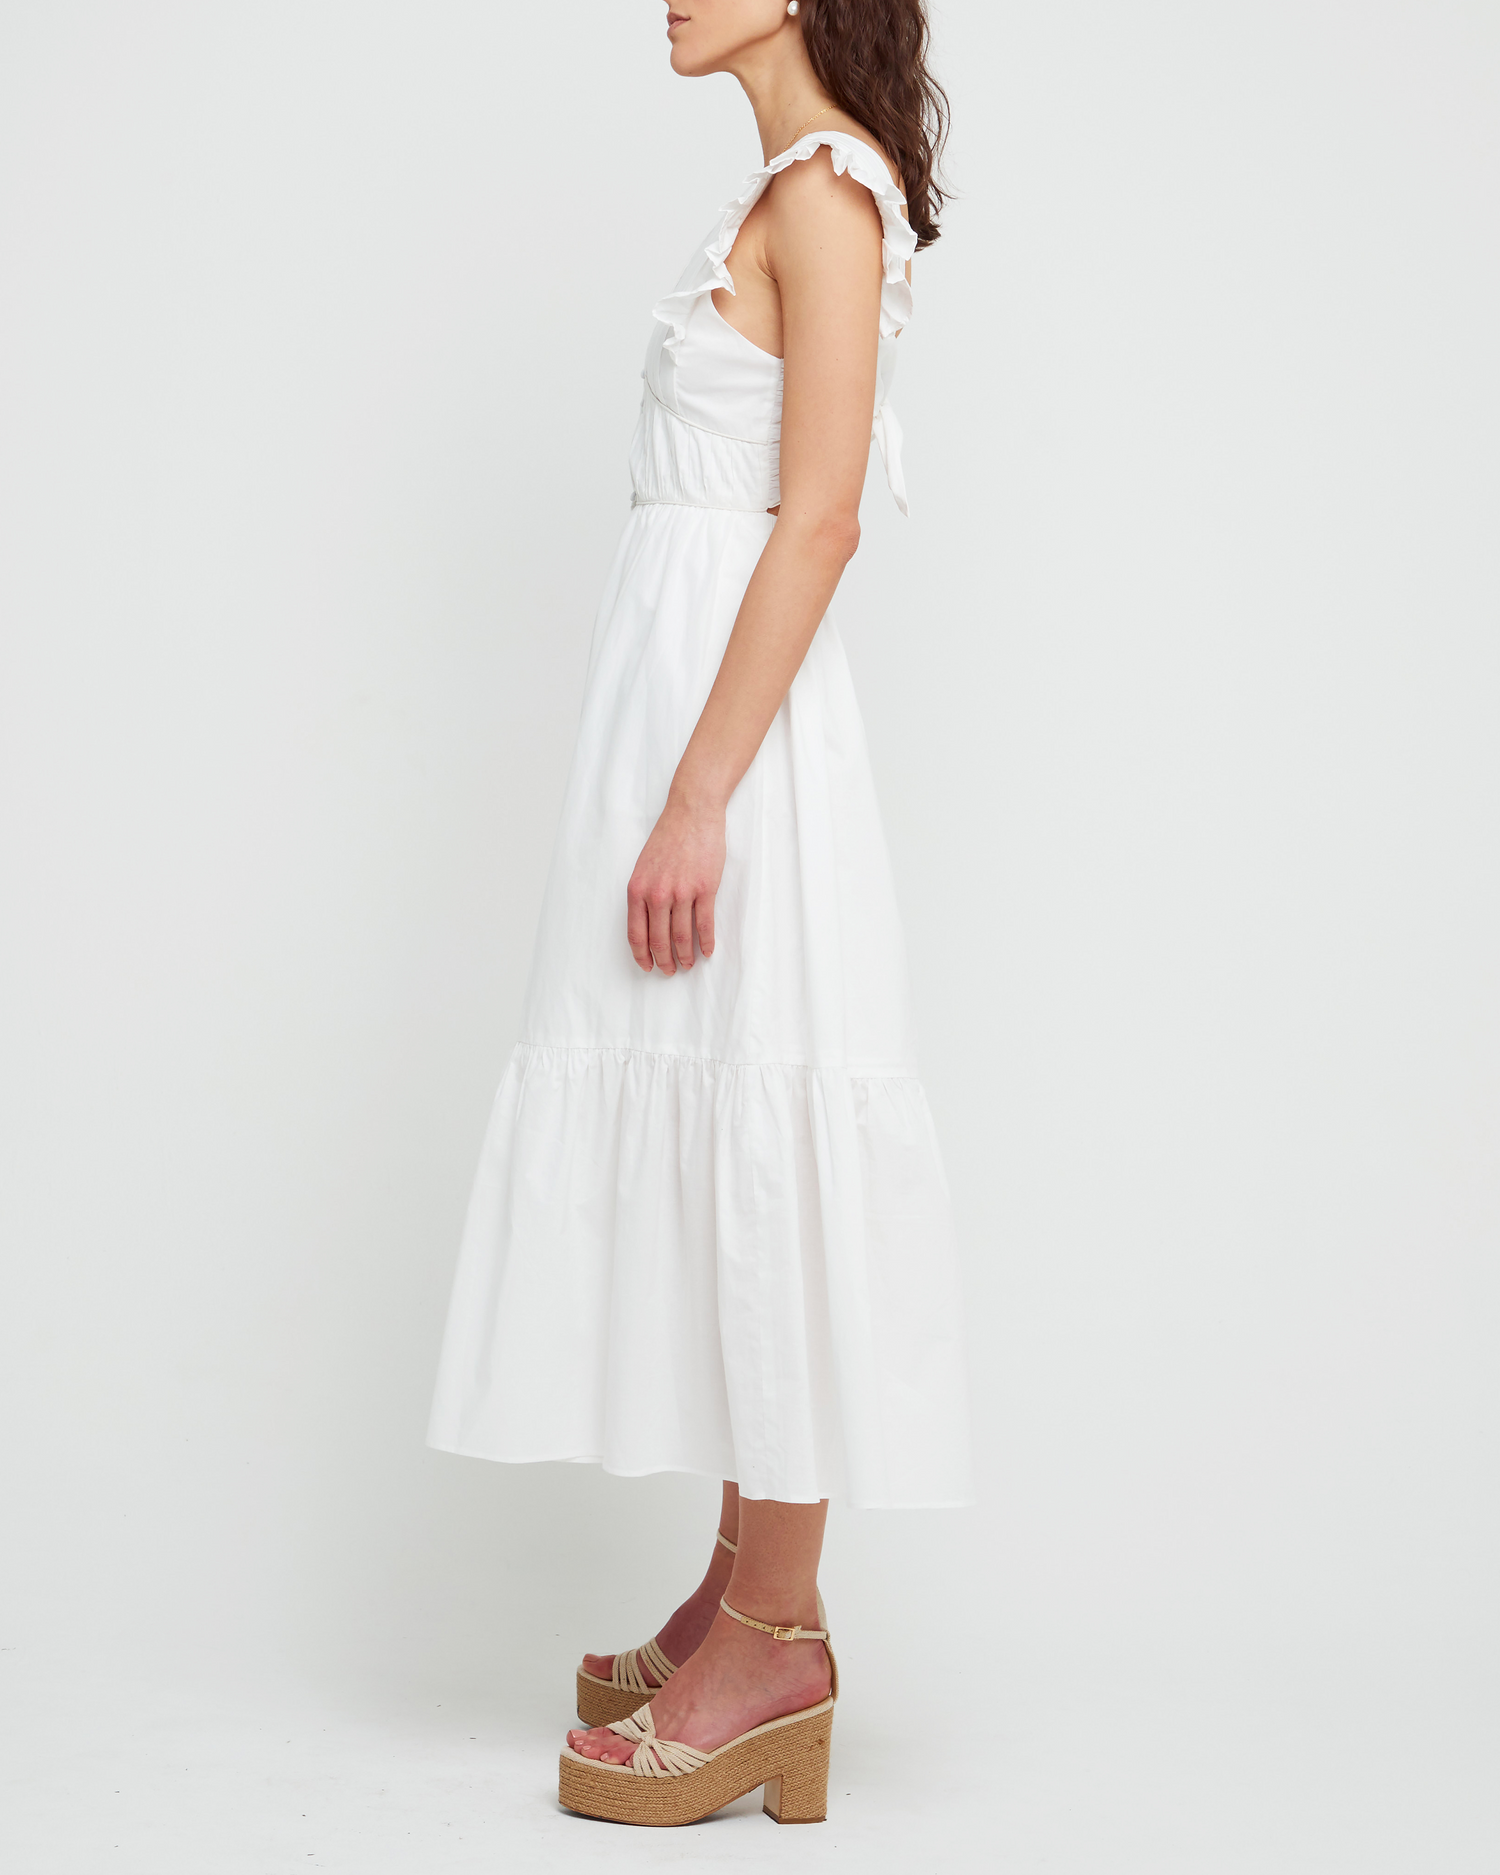 Fifth image of Stella Dress, a white midi dress, front buttons, ruffle sleeve, open back, tiered, tie, ribbon, bow